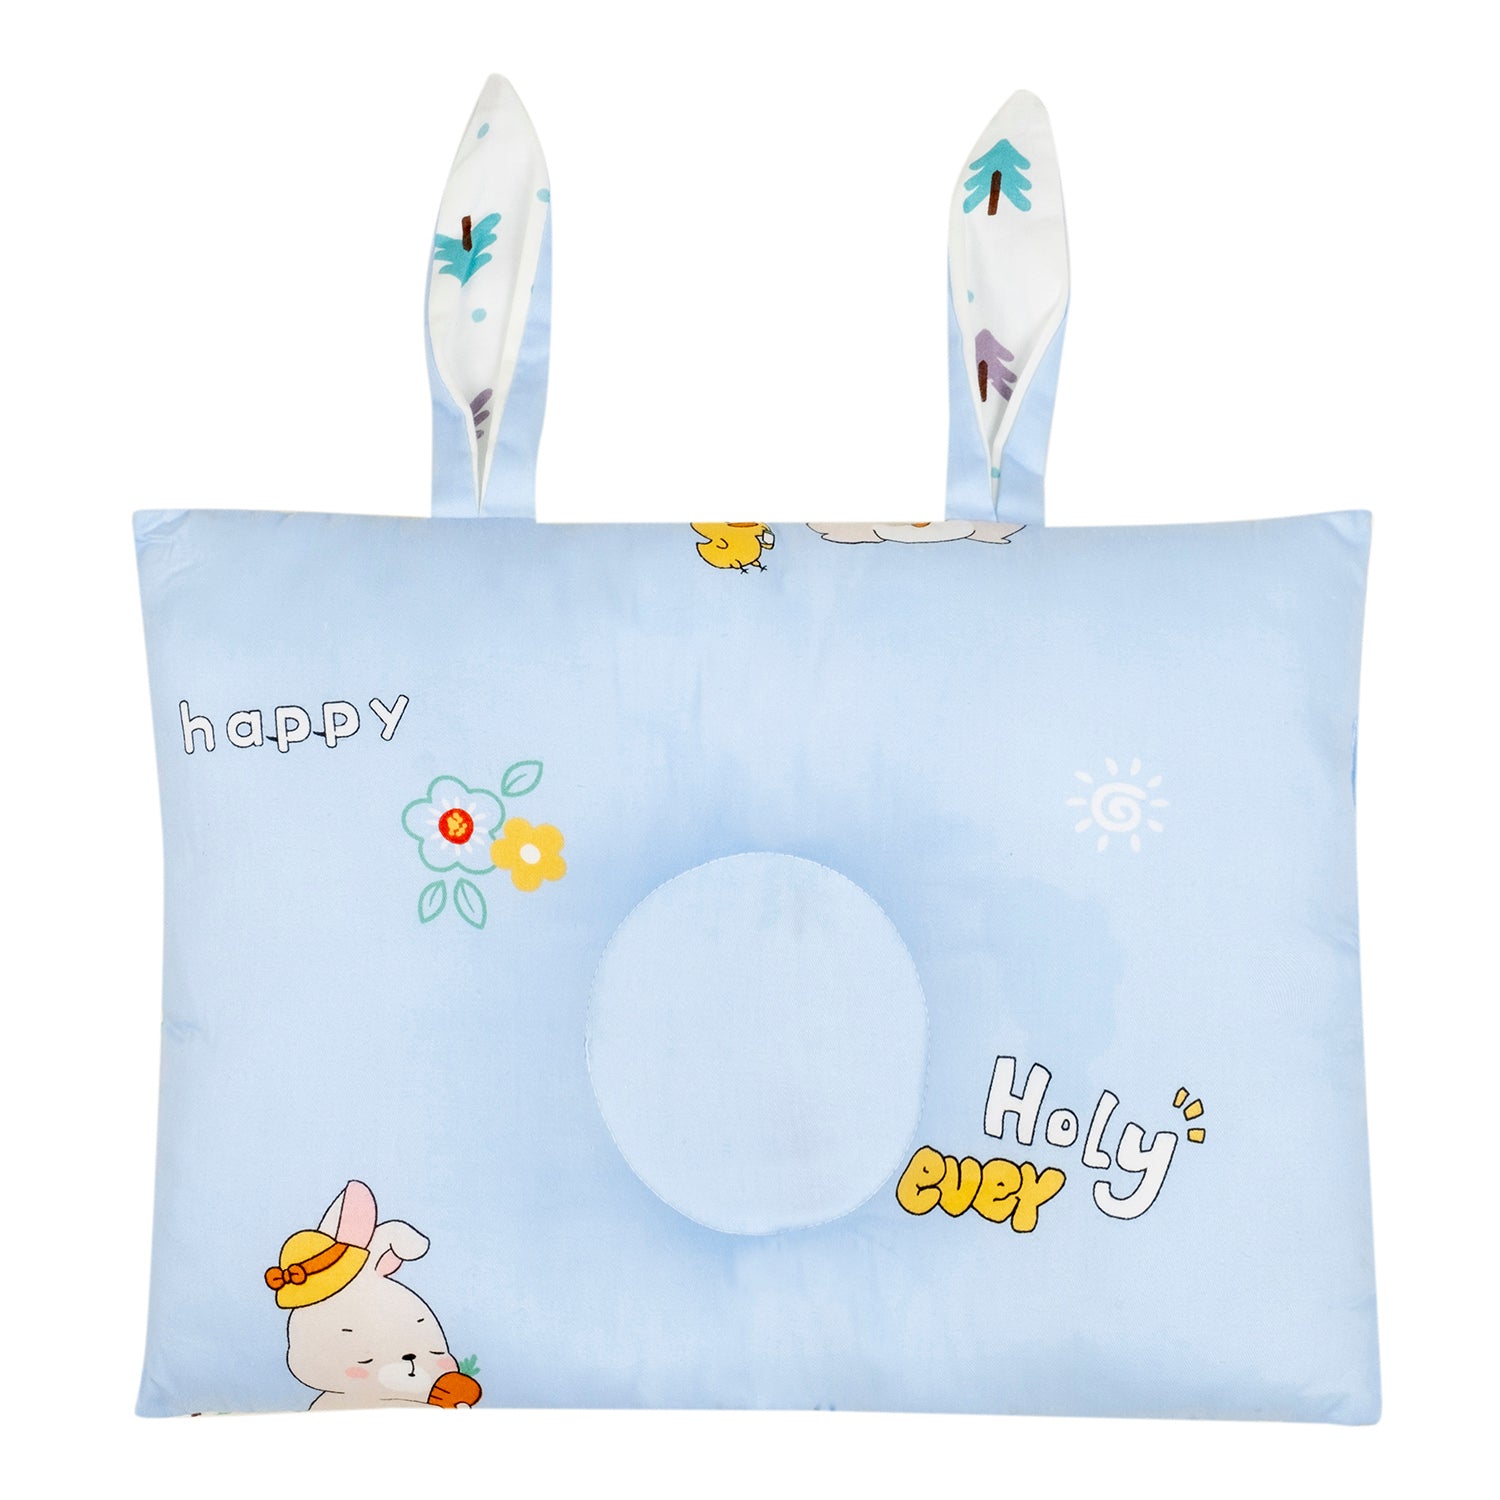 Baby Moo Happy Bunny Reversible Neck Pillow Cushion Pillow - Blue